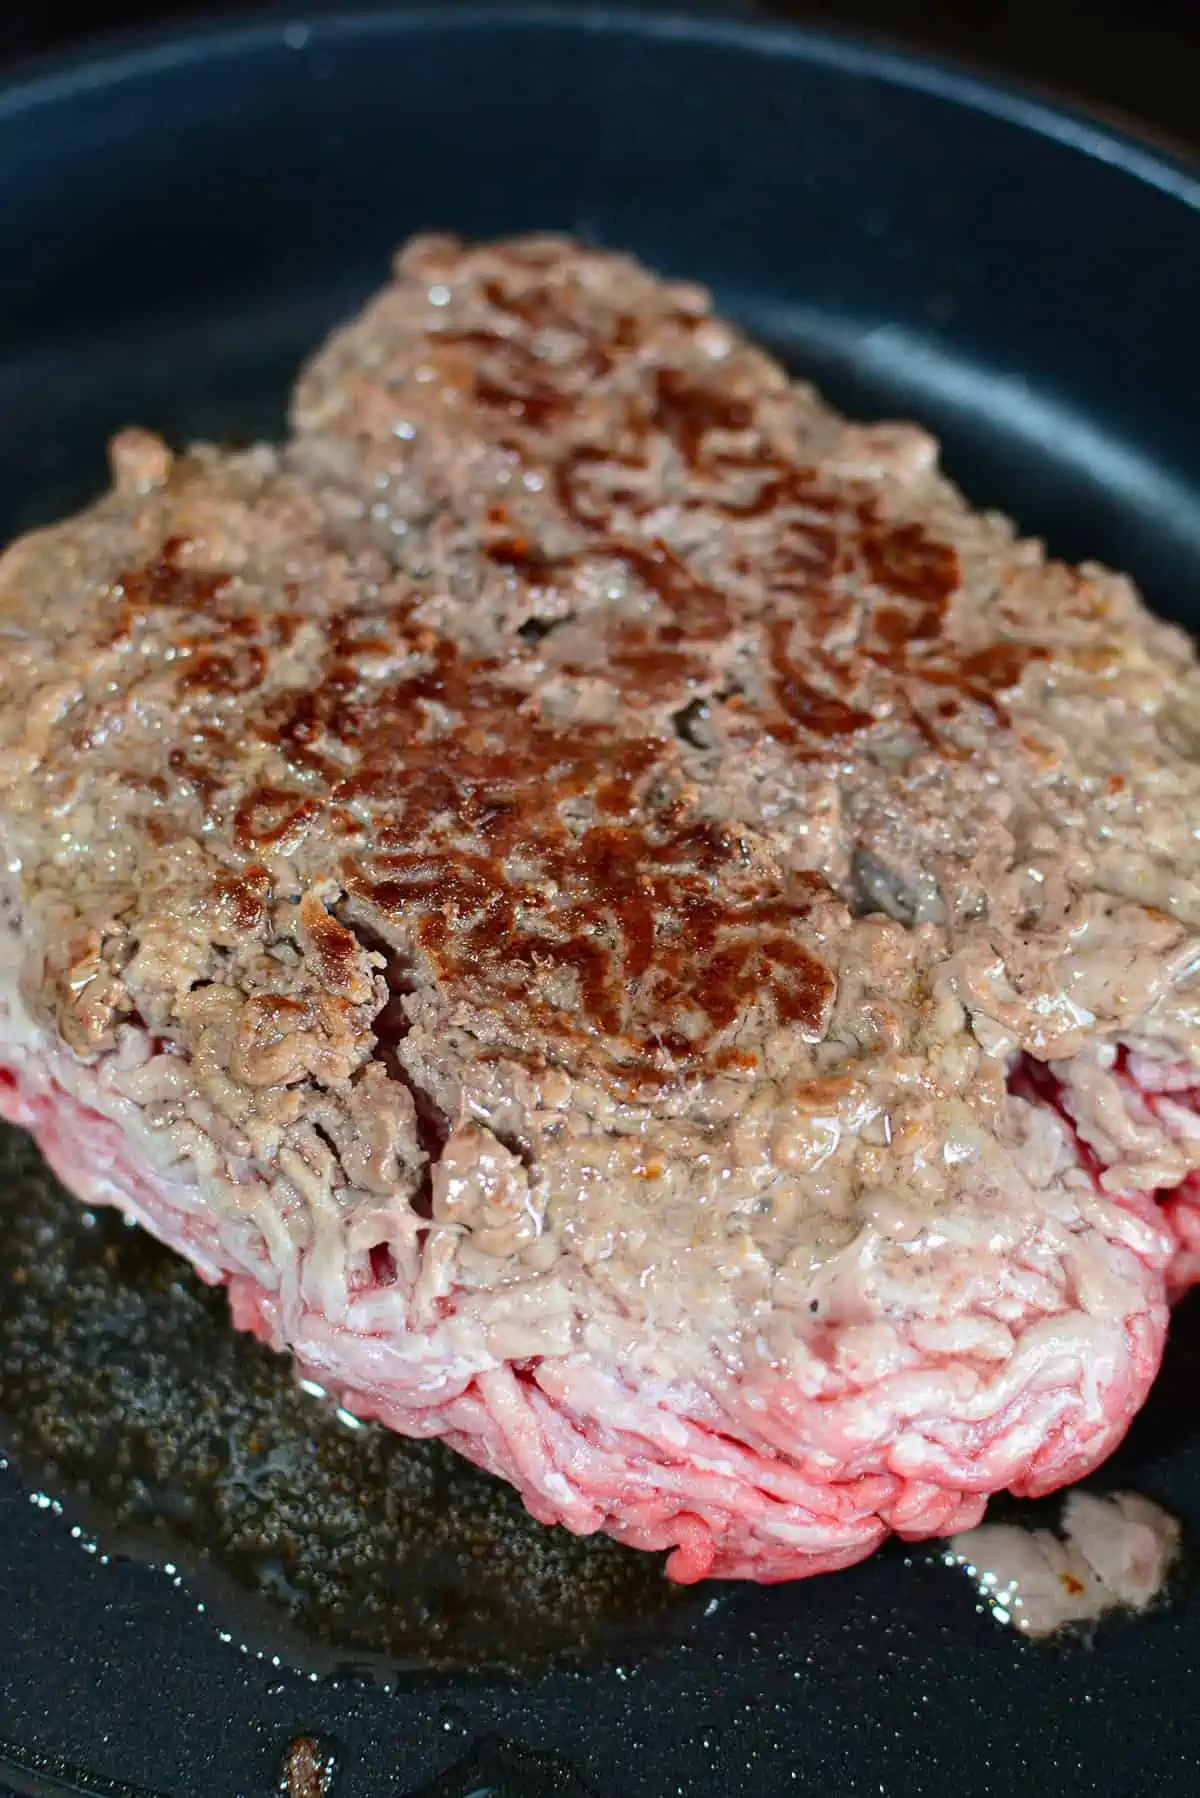 Seared ground beef from a thawed state.